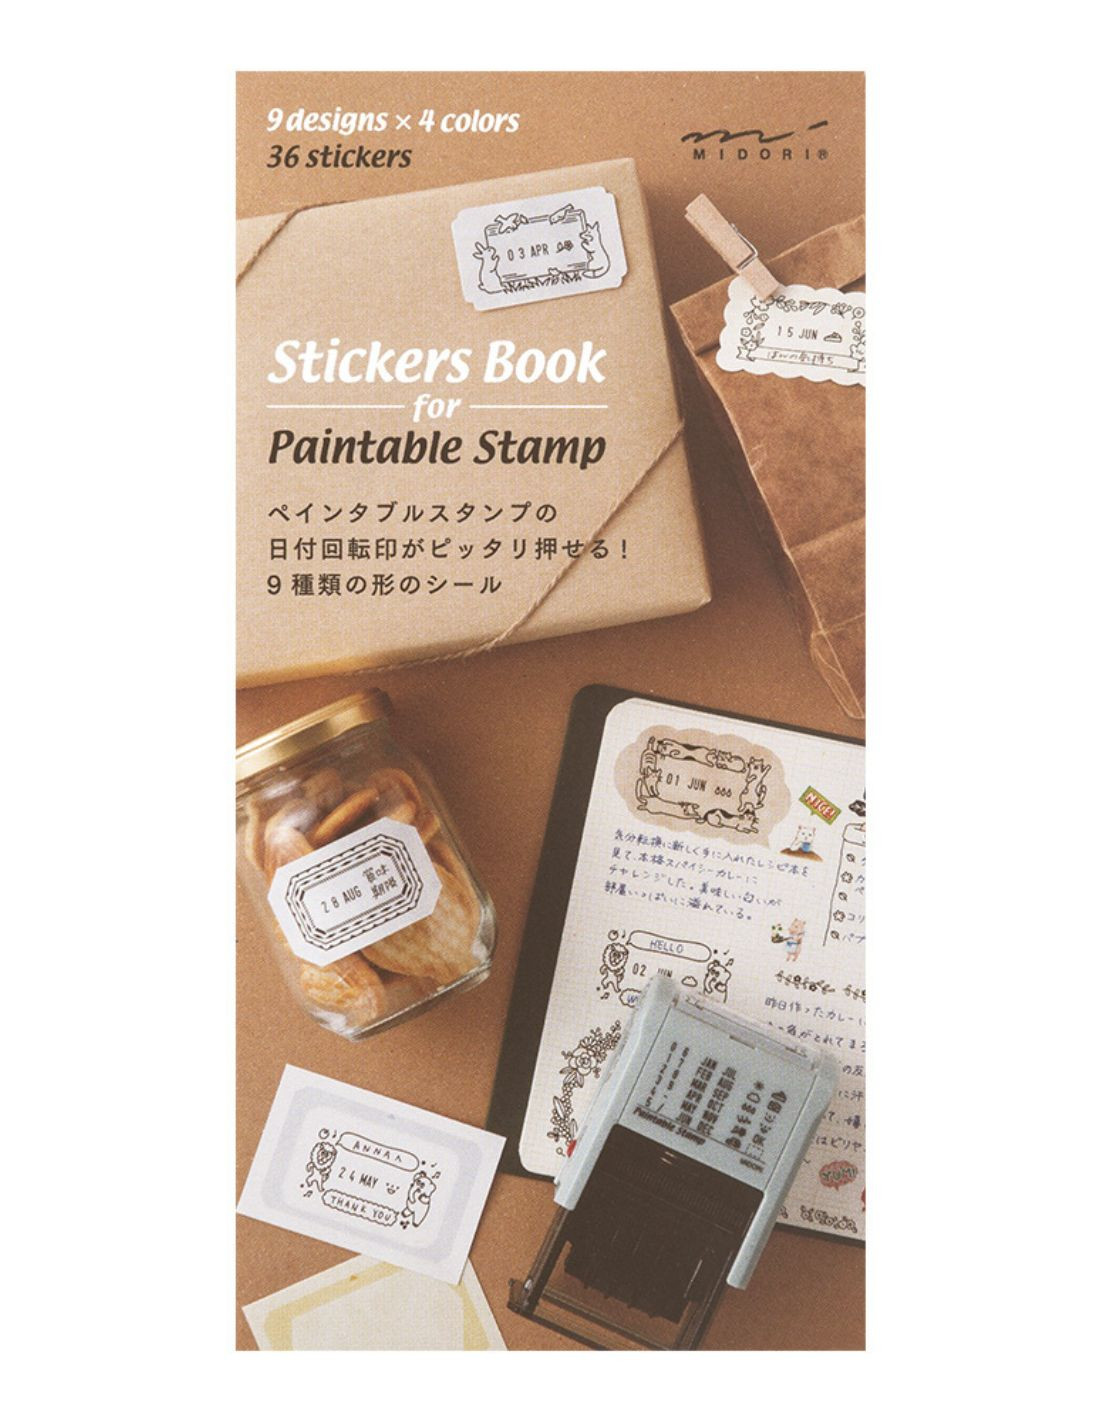 Stickers Book for Rotating Paintable Stamp - Natural Colors - Midori